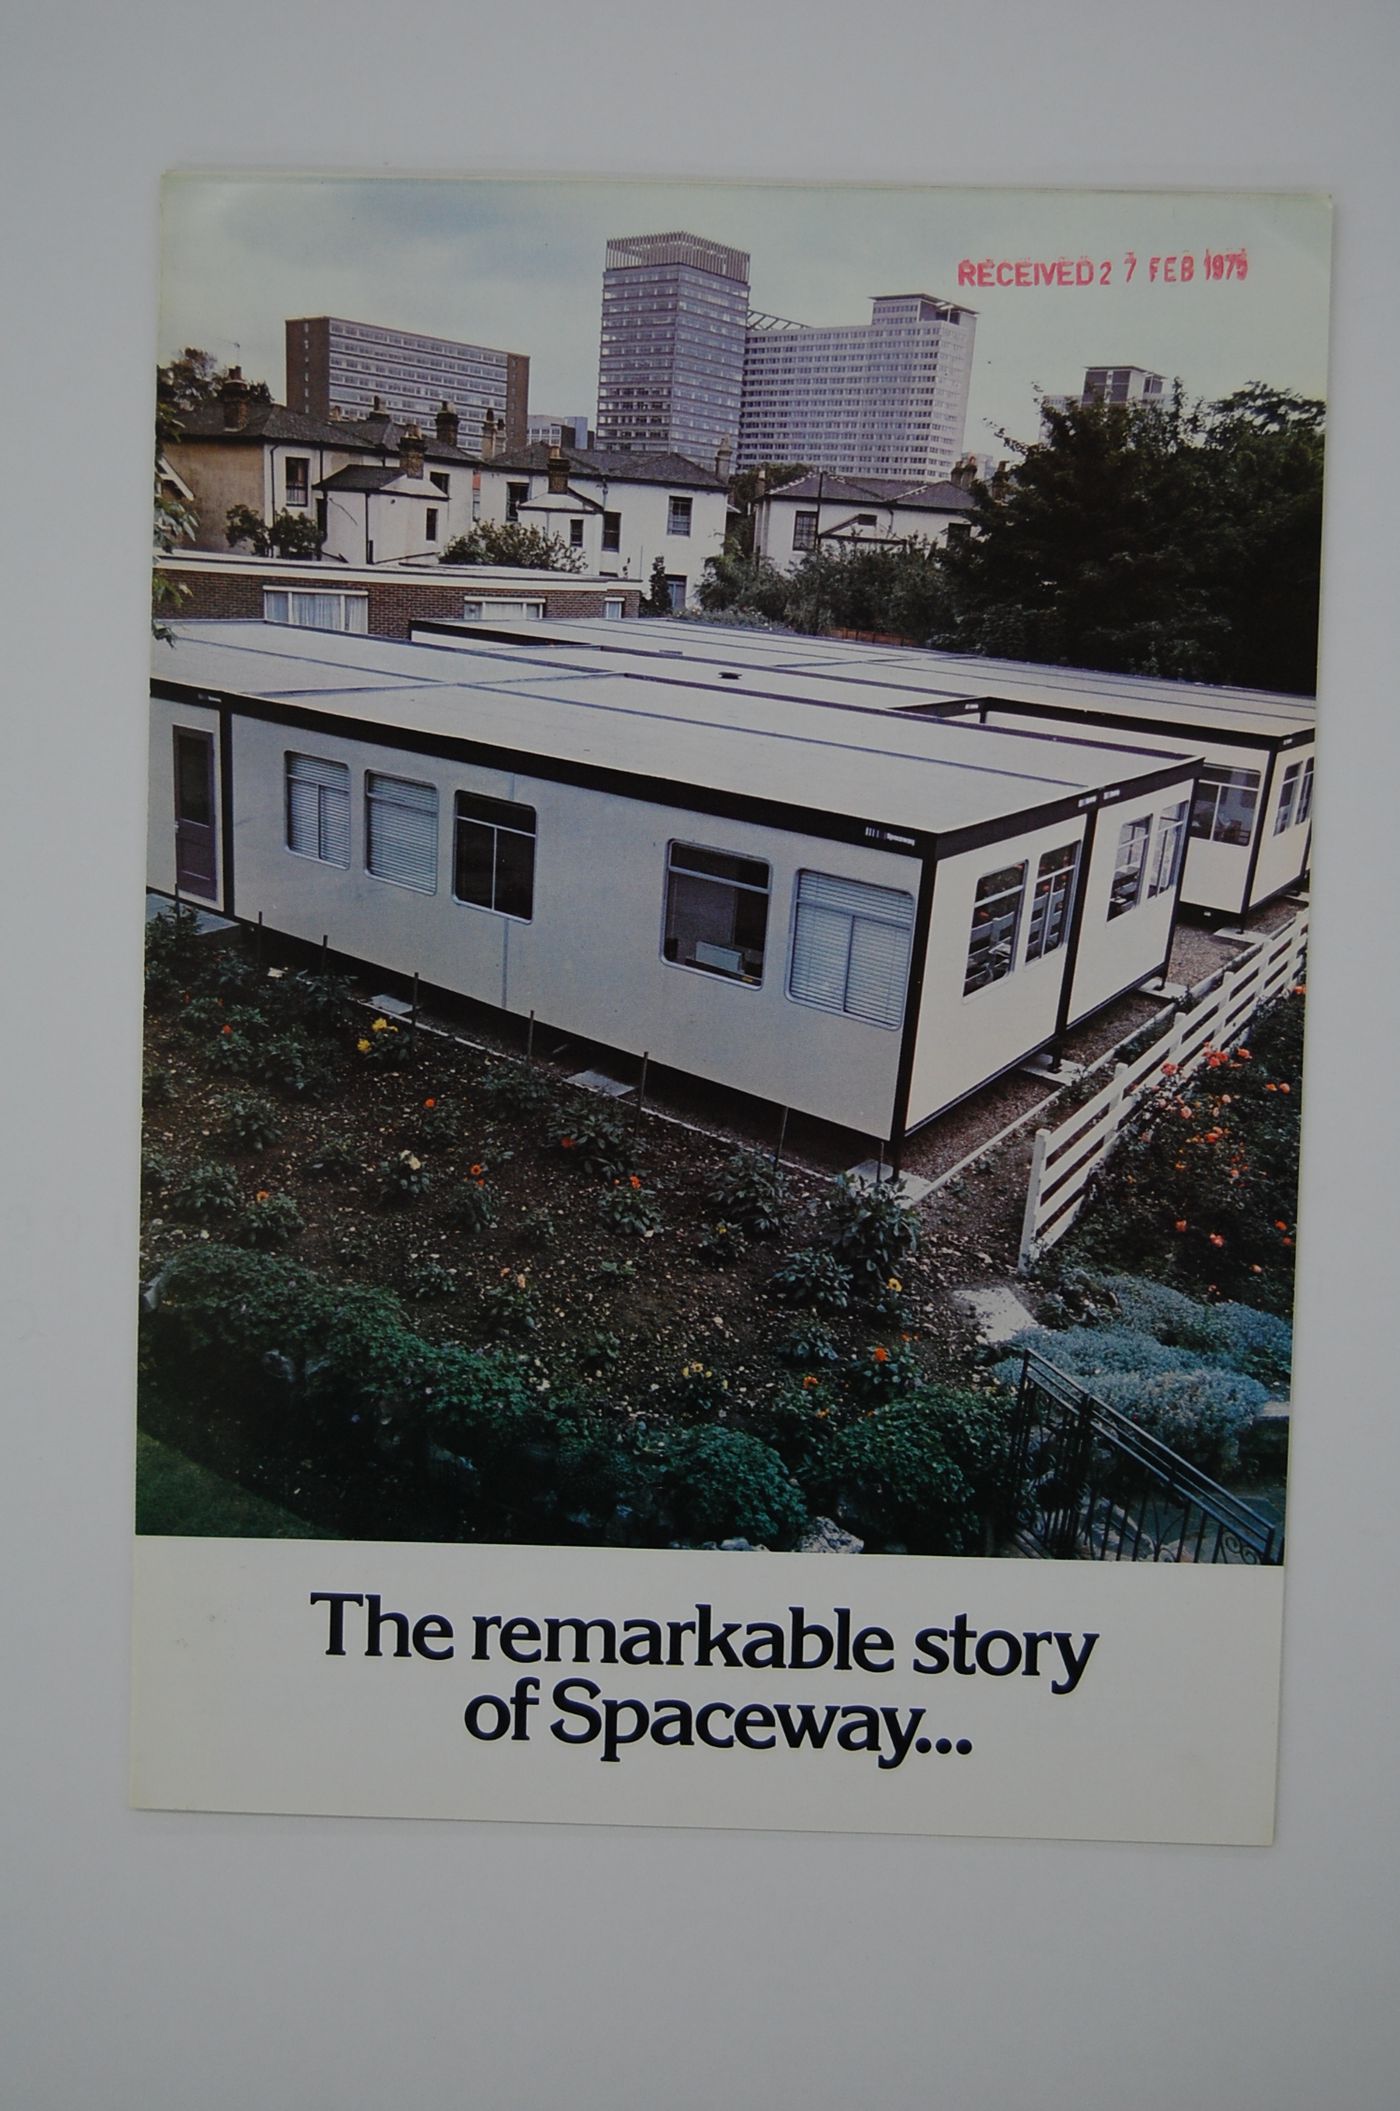 Advertisement for the Spaceway system, an 'instant' single storey building